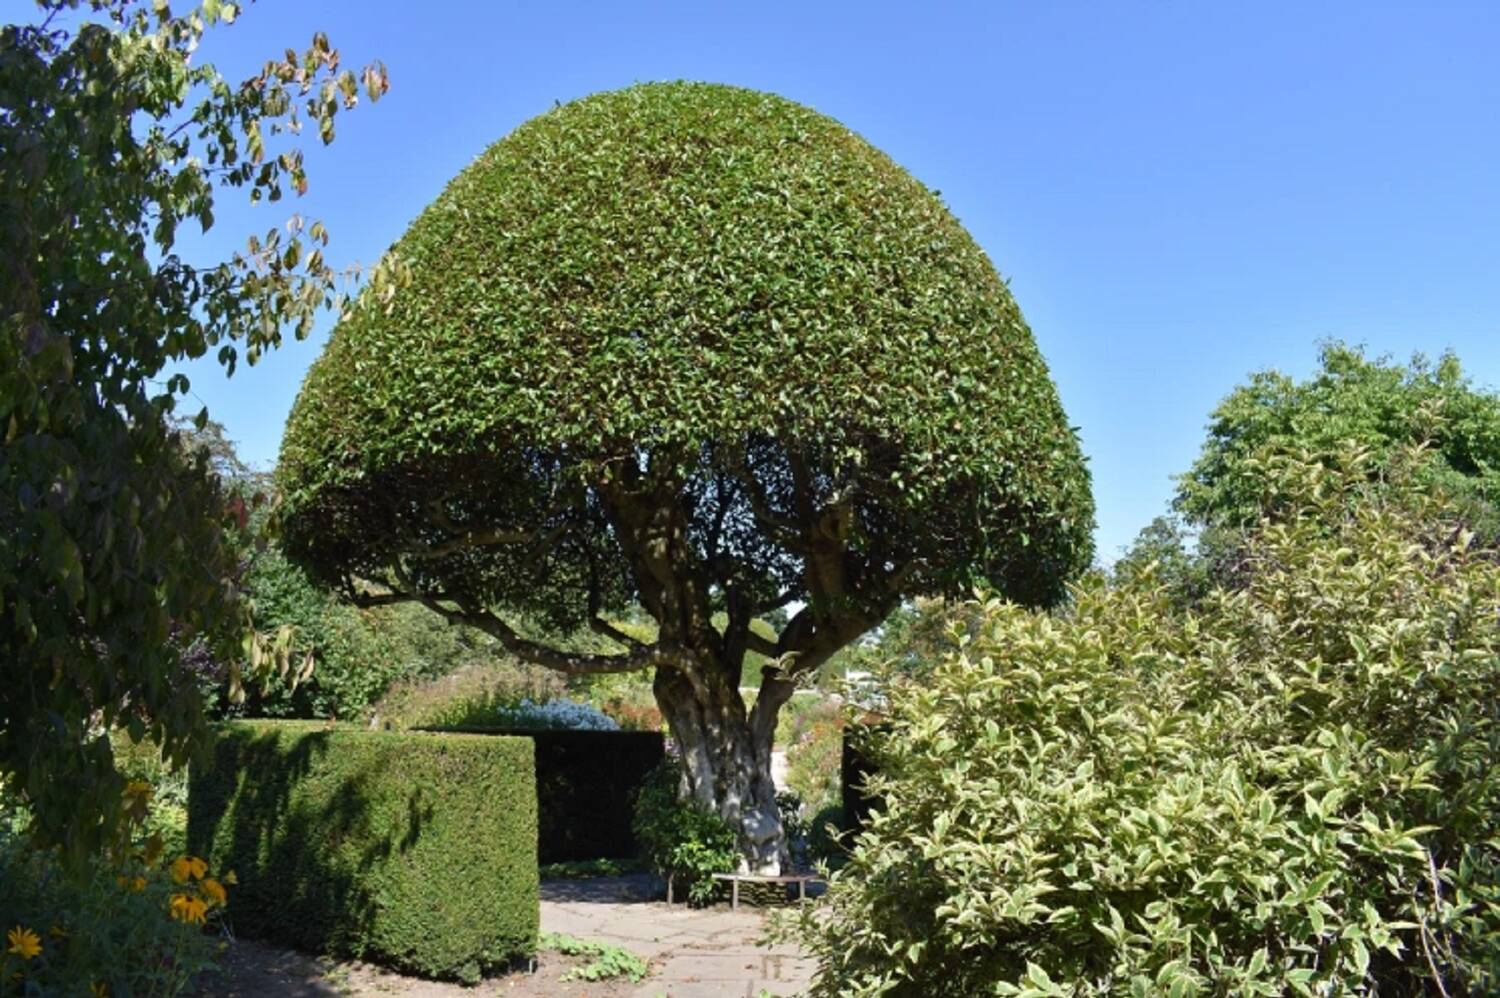 A Portugal laurel tree grows in the middle of a garden, with a paved area directly surrounding it and then neat hedges and shrubs. It is almost mushroom-shaped, with a thick trunk topped by a dense, dark green domed canopy.